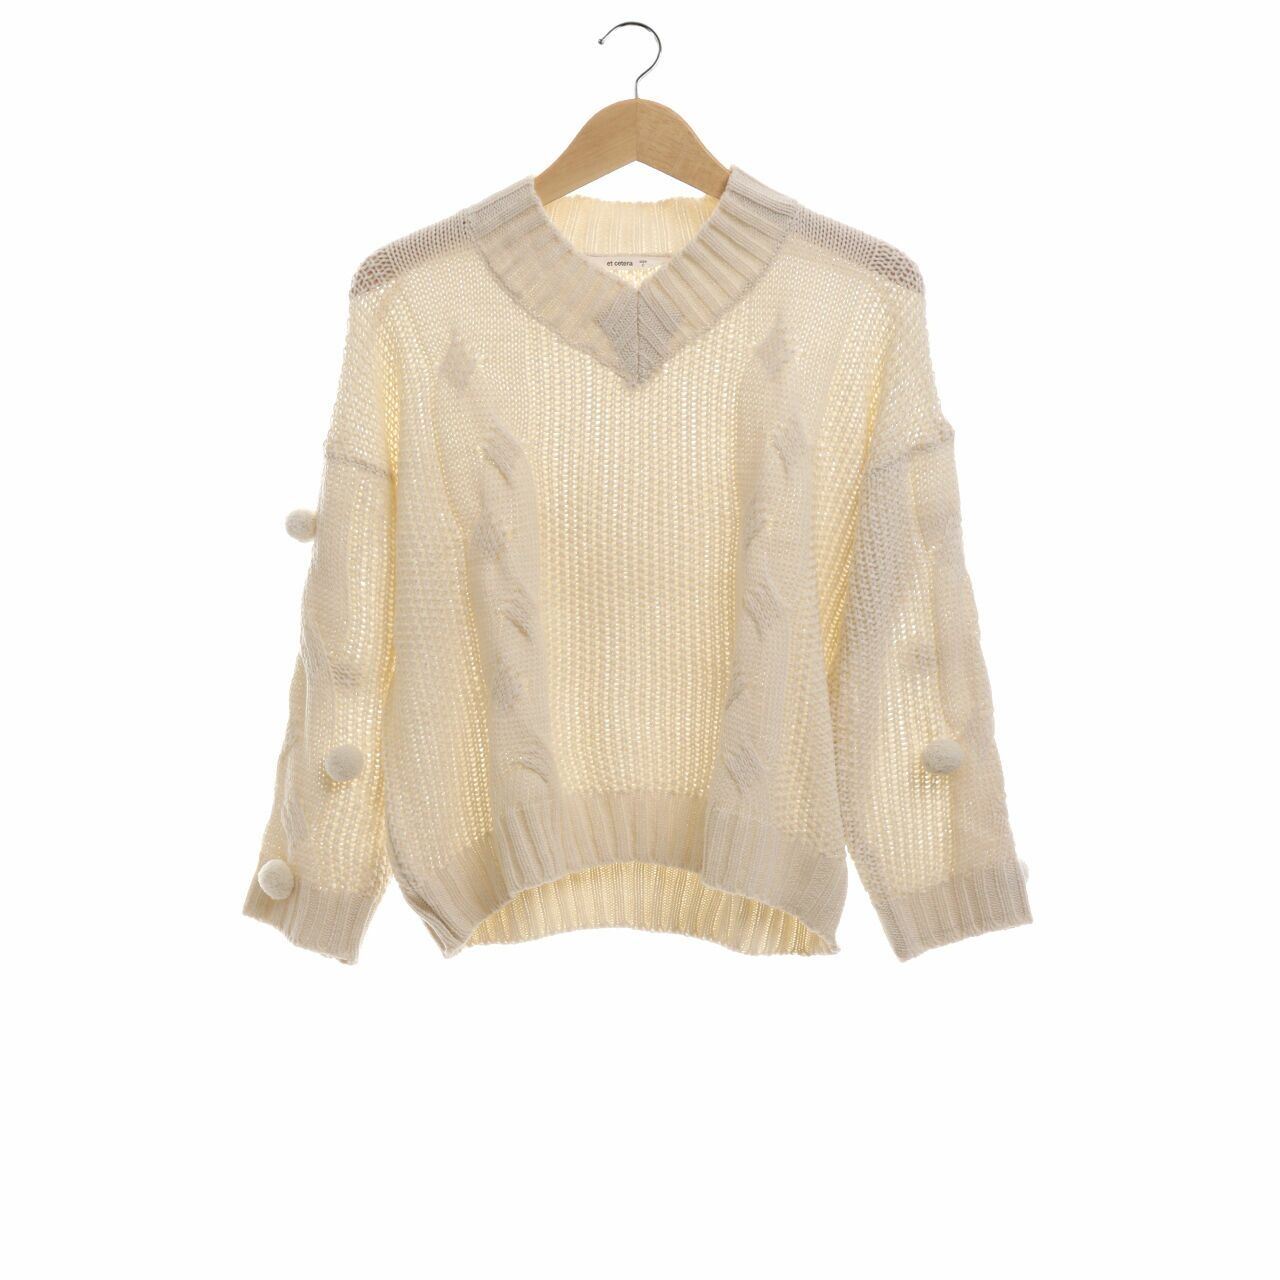 Et Cetera Off White Knit Sweater